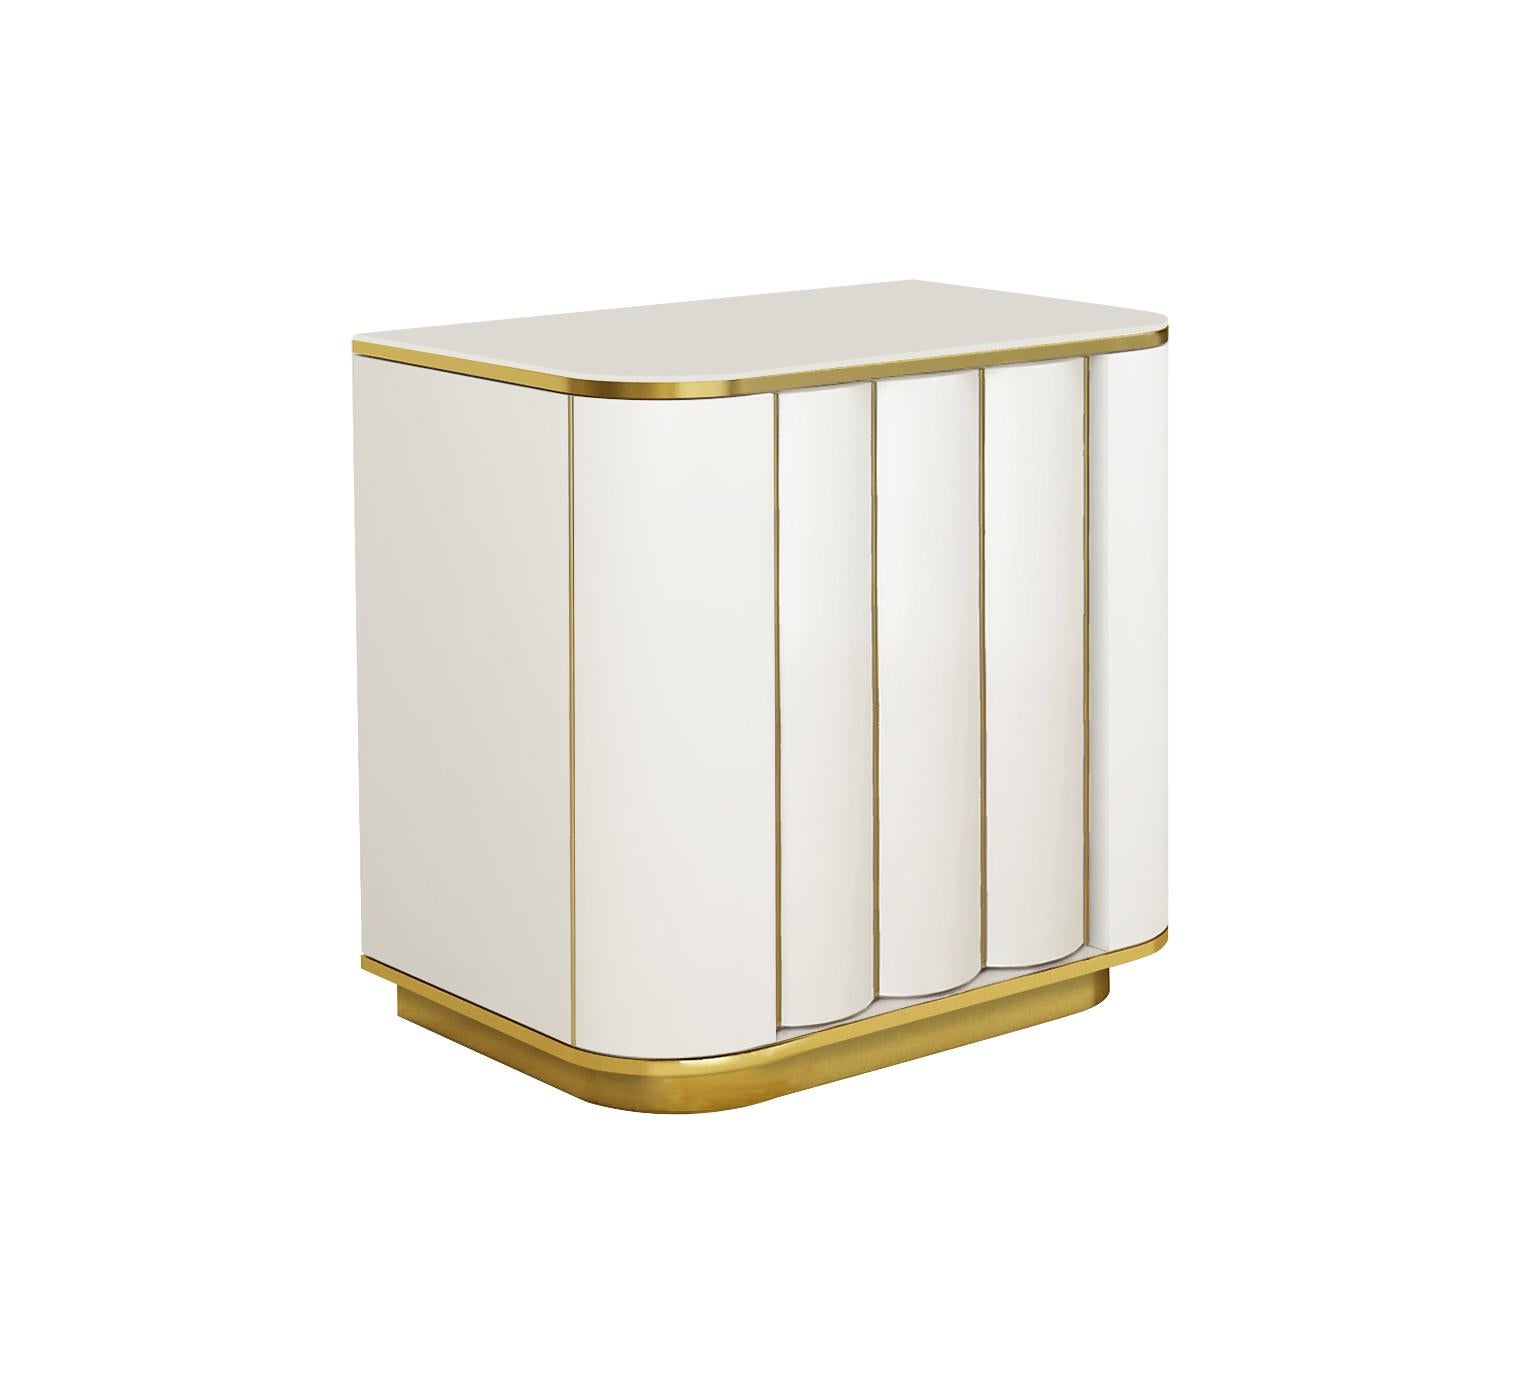 Designed by IC and beautifully crafted by Italian artisans, the Duilio nightstand features a ribbed door hiding one shelf.
The piece is elegantly enriched with brass, or powder-coated metal, details.
Finish: Ivory matte lacquered with polished